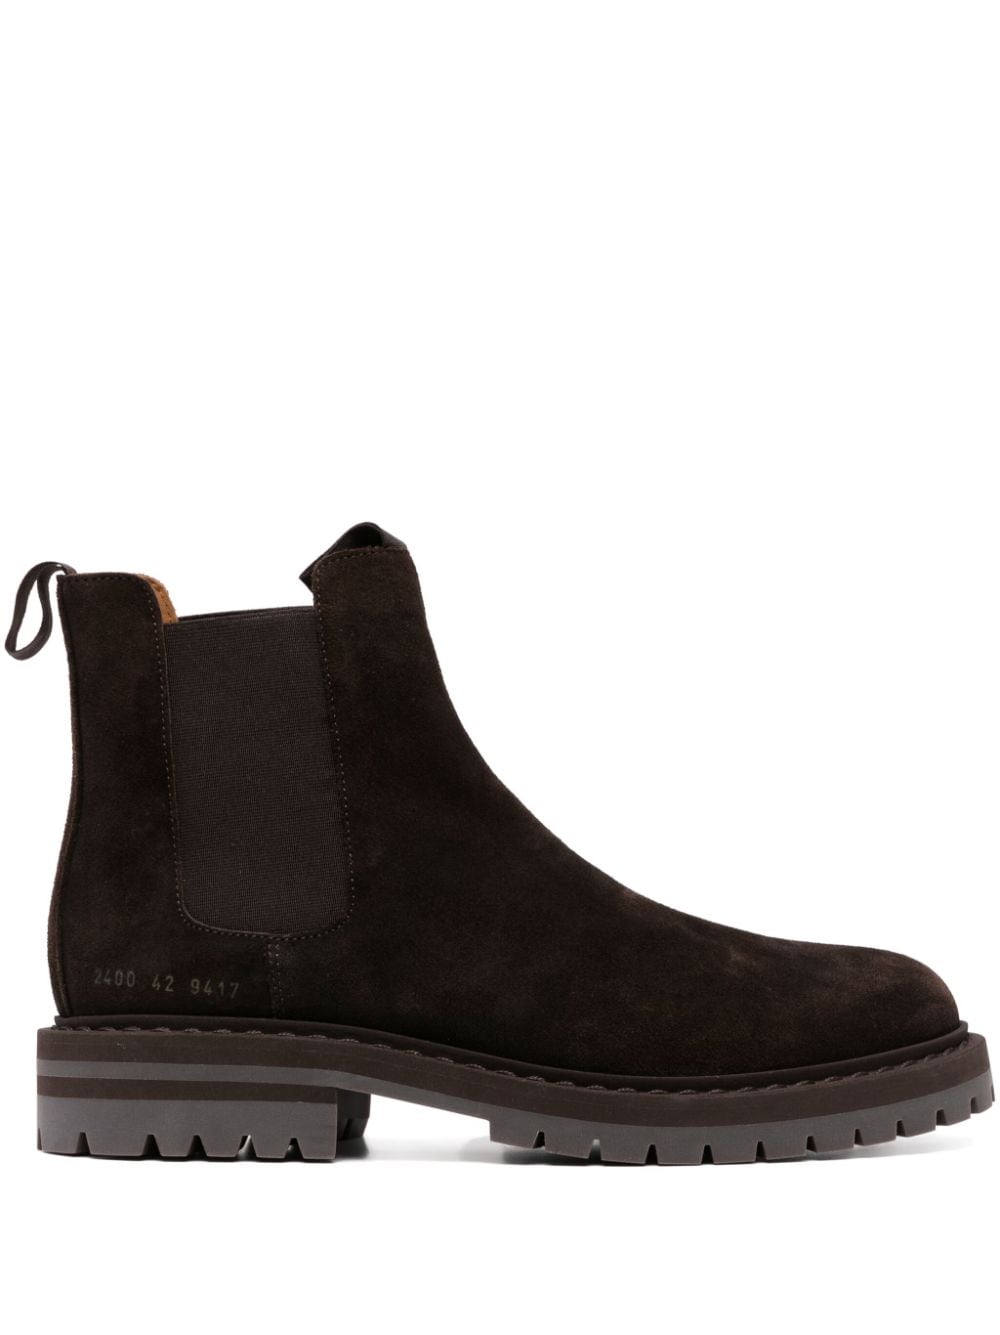 Common Projects suede Chelsea boots - Brown von Common Projects